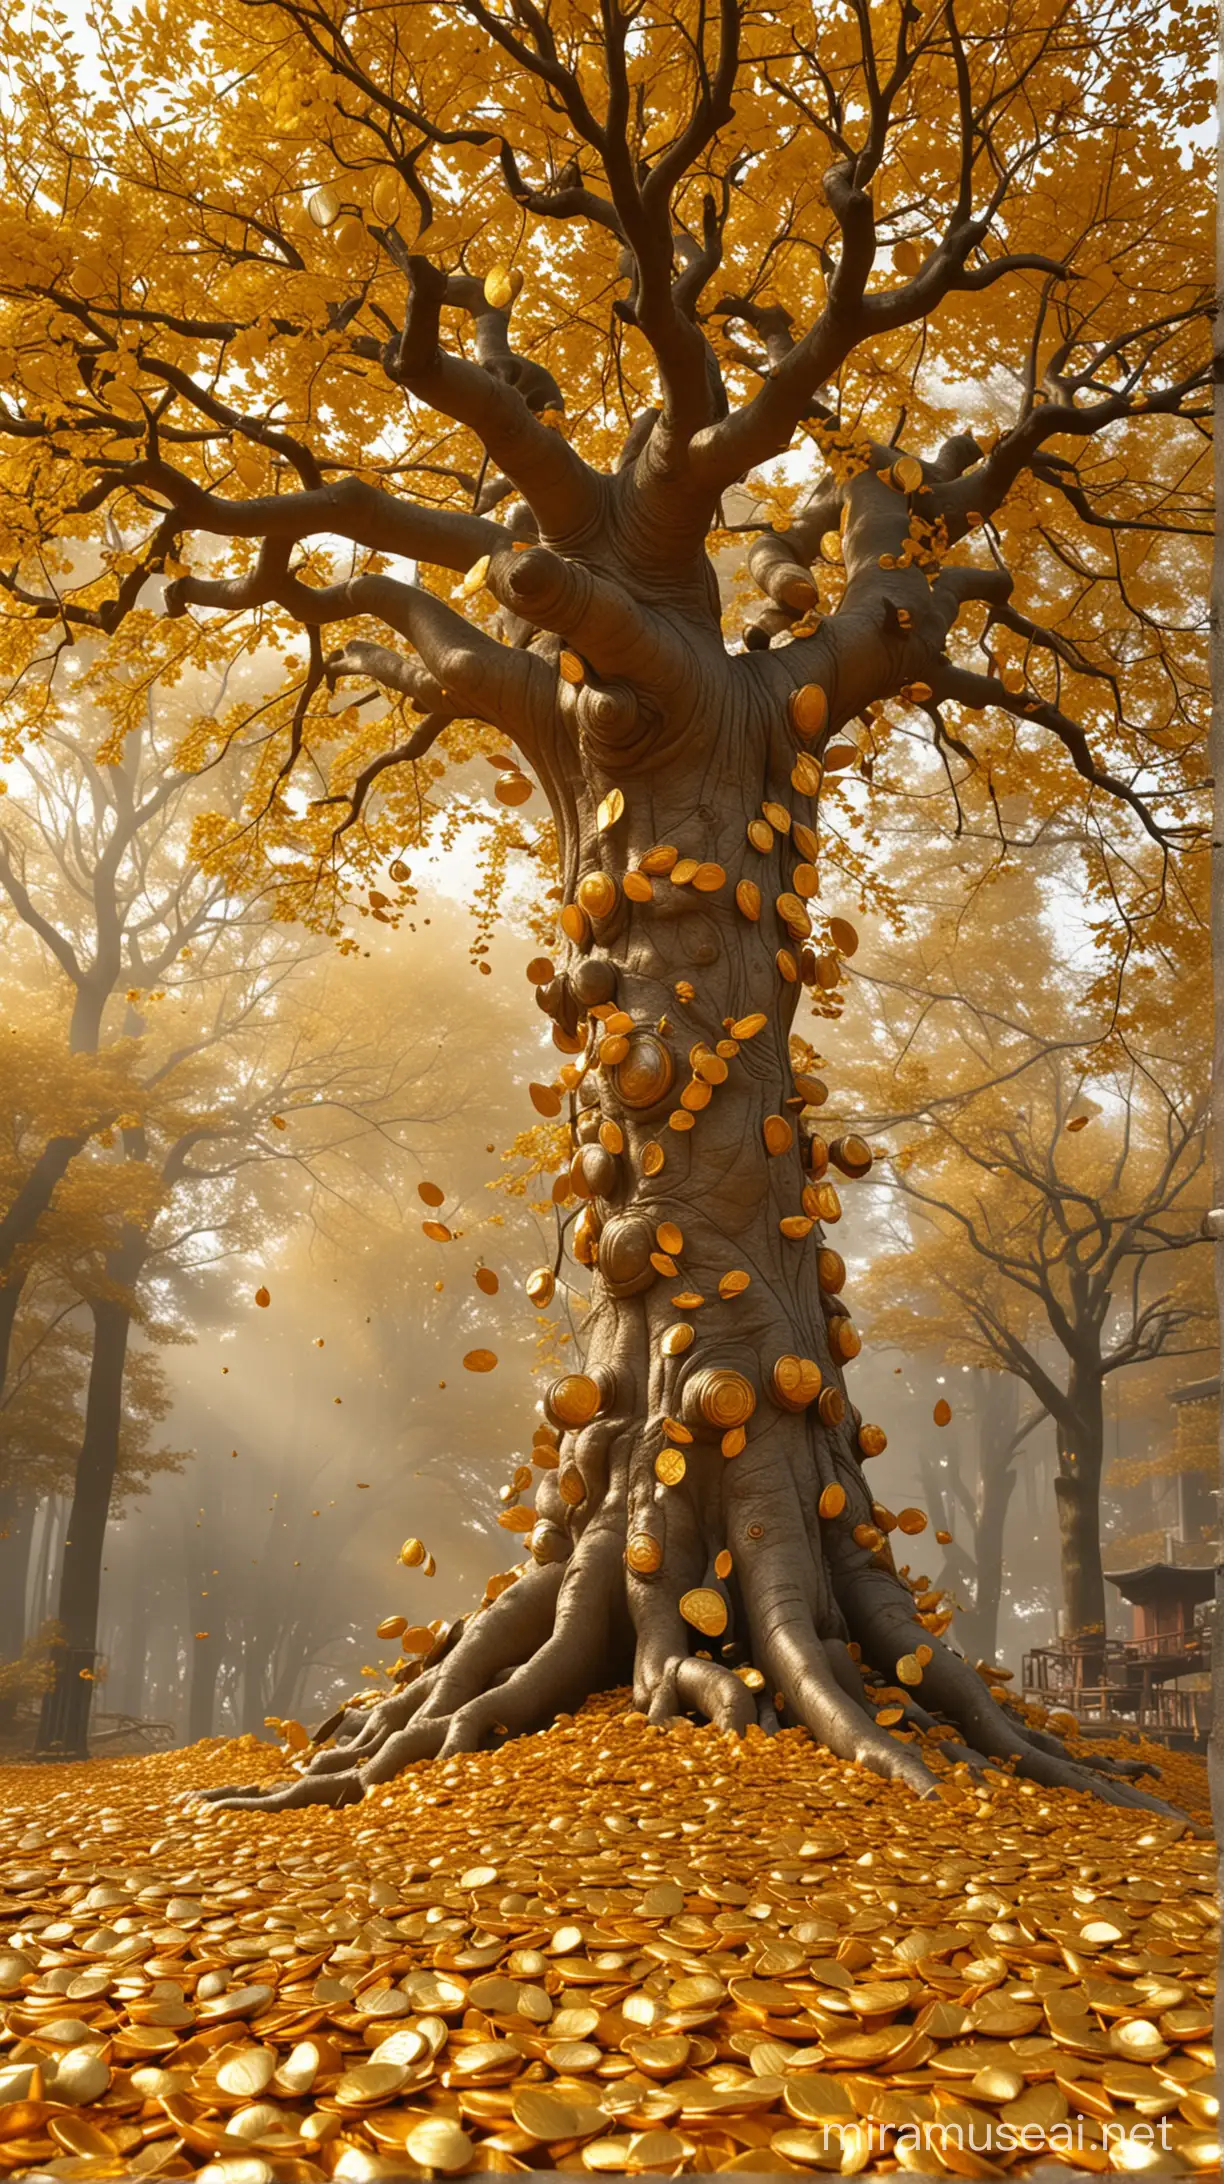 Golden Prosperity Tree with Flying Gold Ingots in a Dreamy Panoramic Landscape